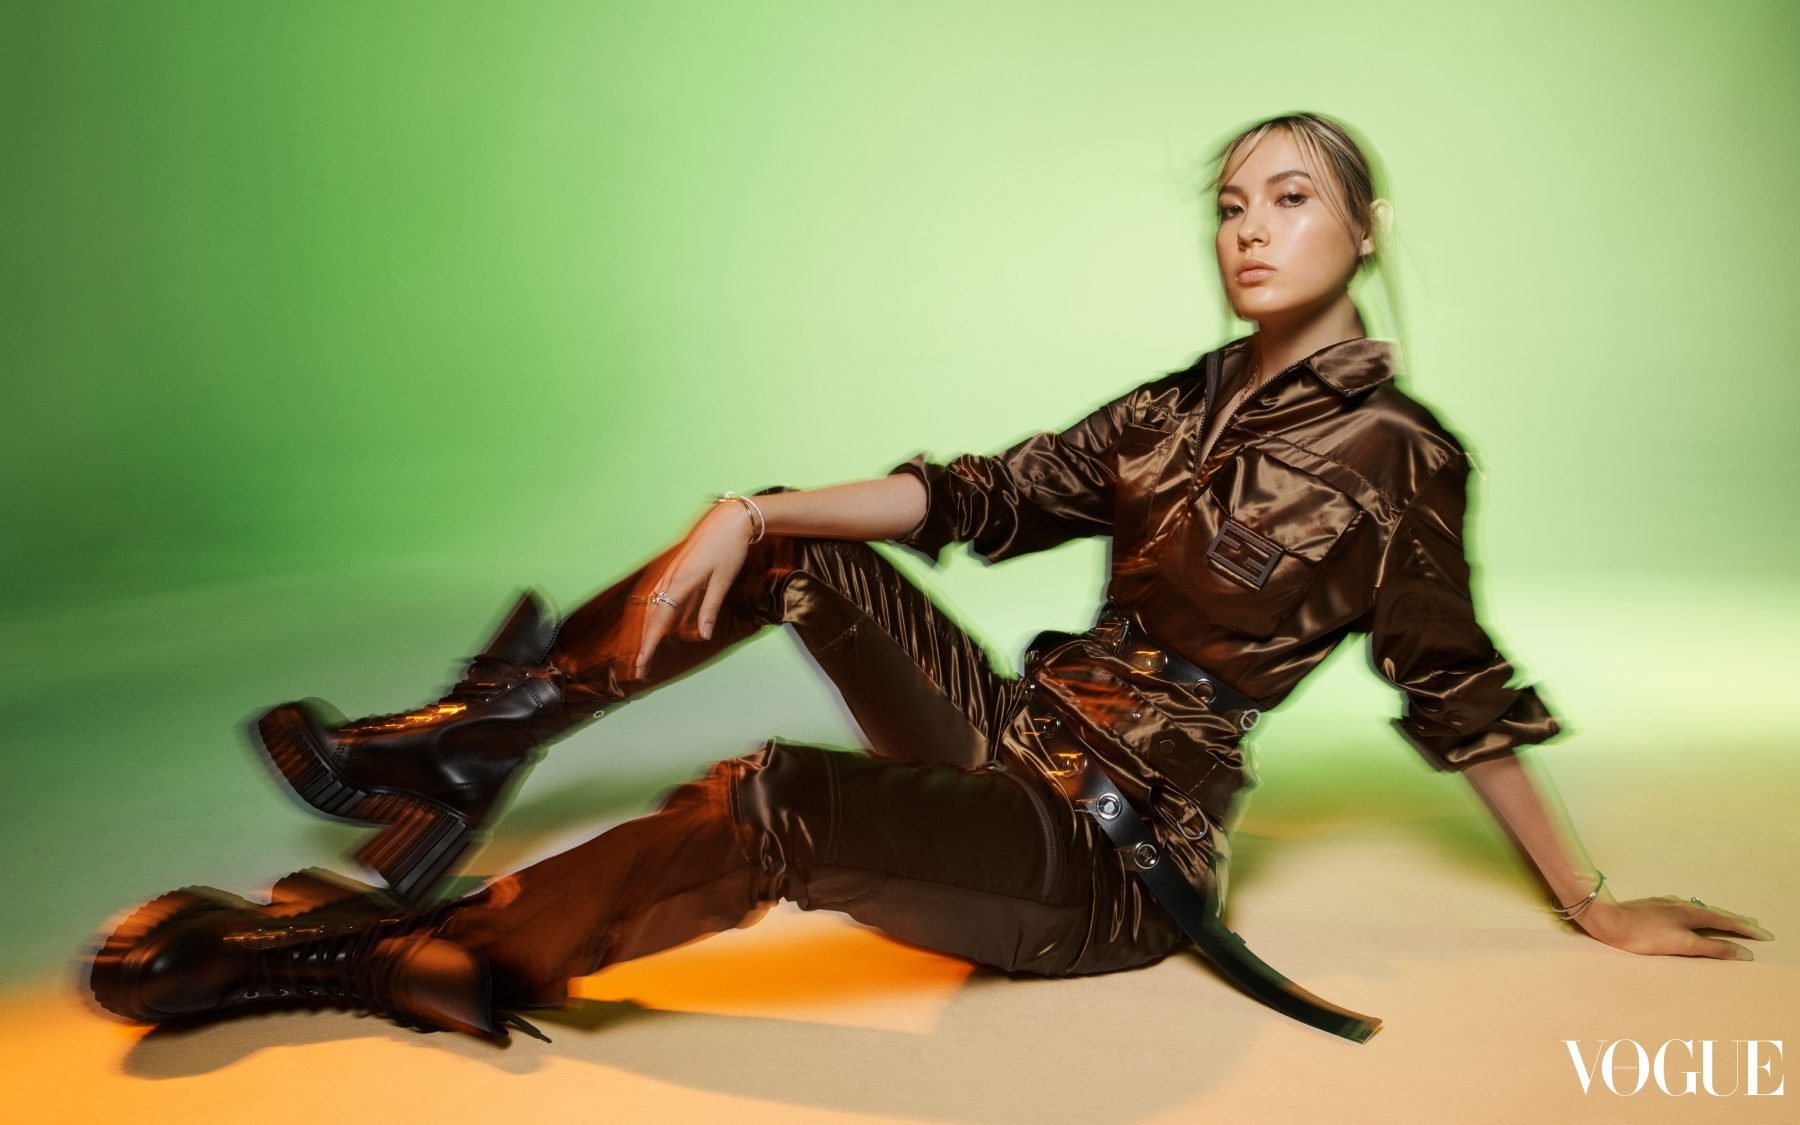 Eileen Gu on fashion, fame and success – the Olympic idol opens up about  discrimination, her Chinese roots, Instagram empowerment and modelling for  Louis Vuitton and Tiffany & Co.